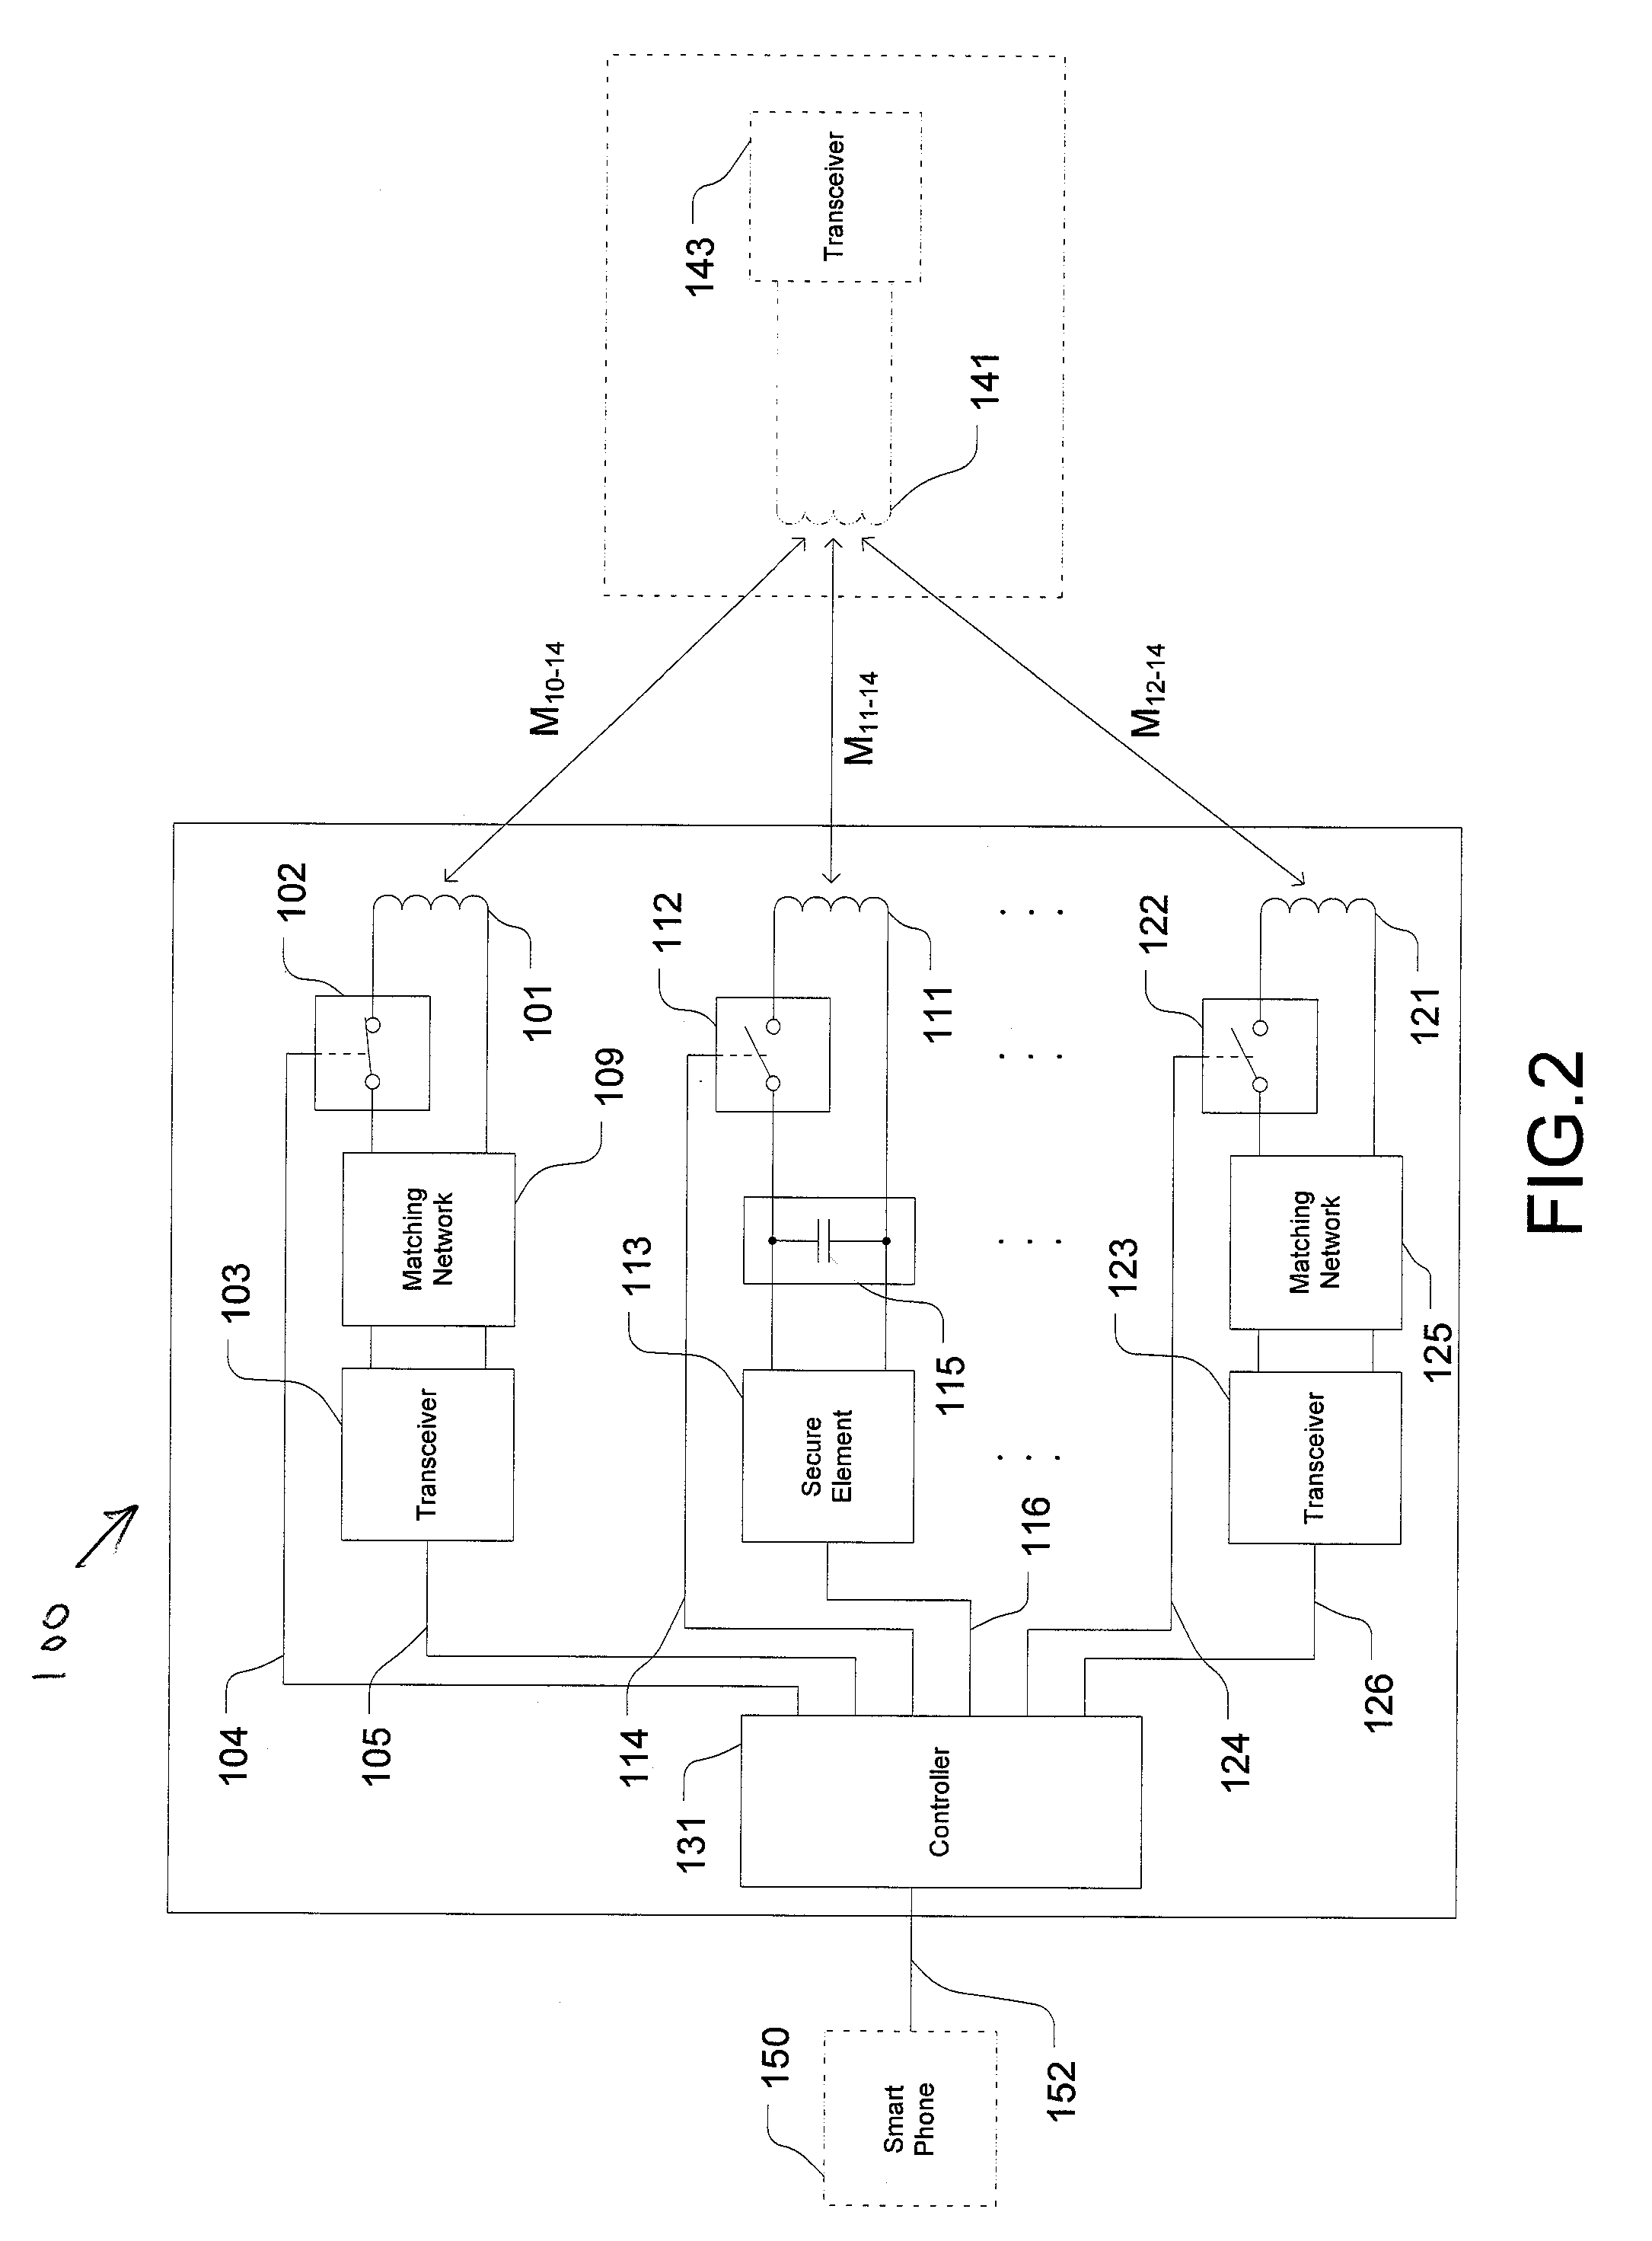 Multi-mode communication system for a mobile phone